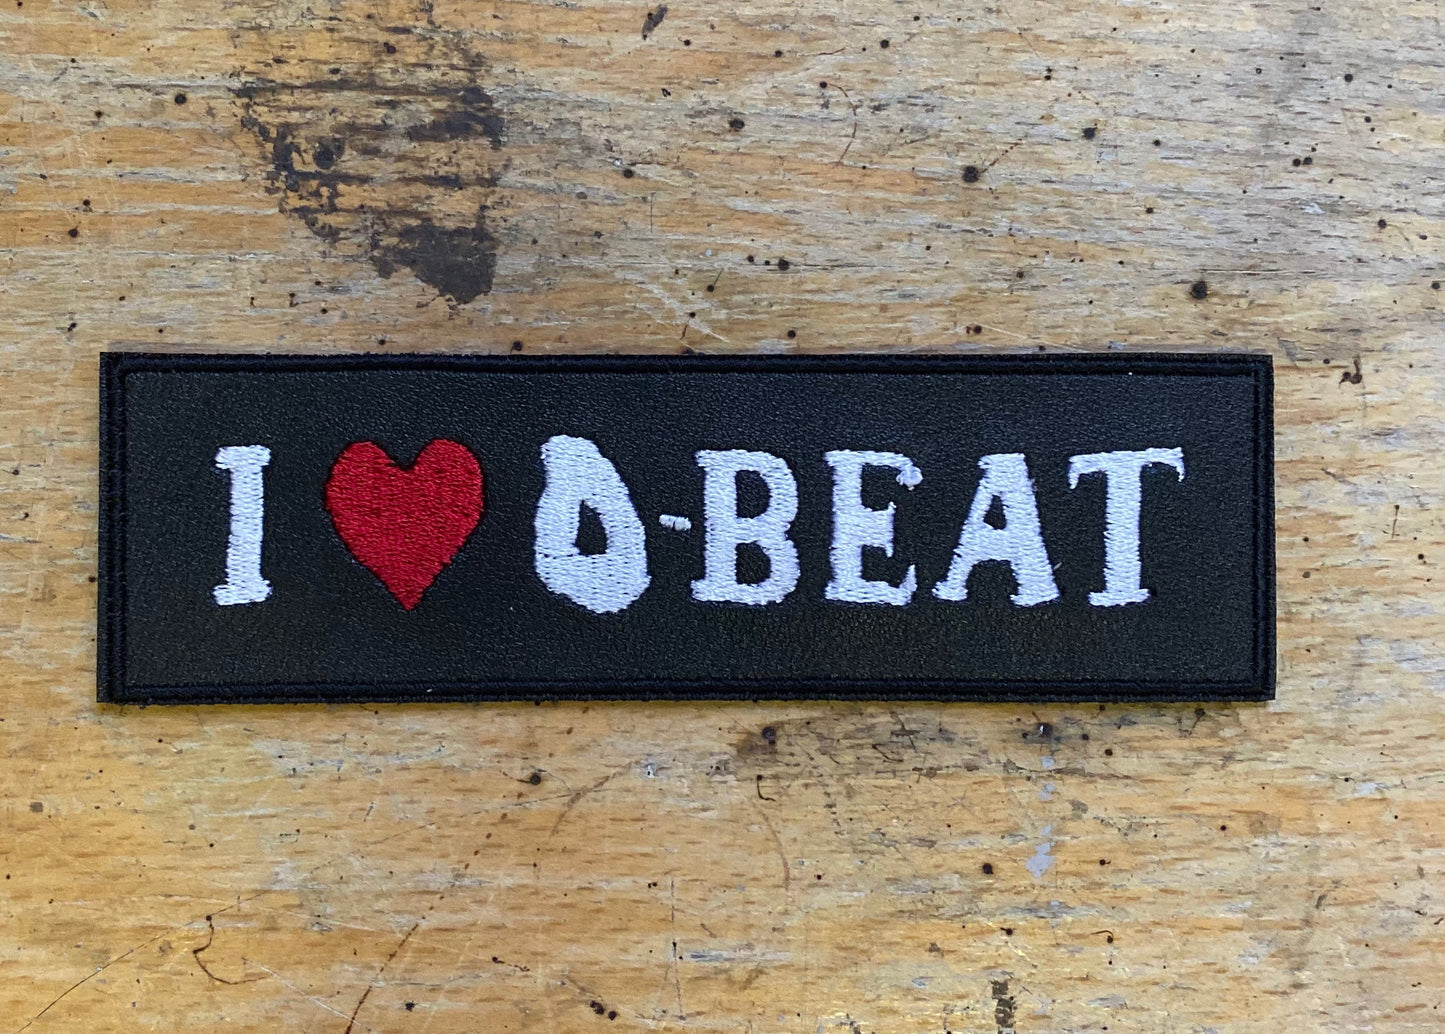 I Love D-beat - Fake Leather Patch - Insane//Phobia Embroidery